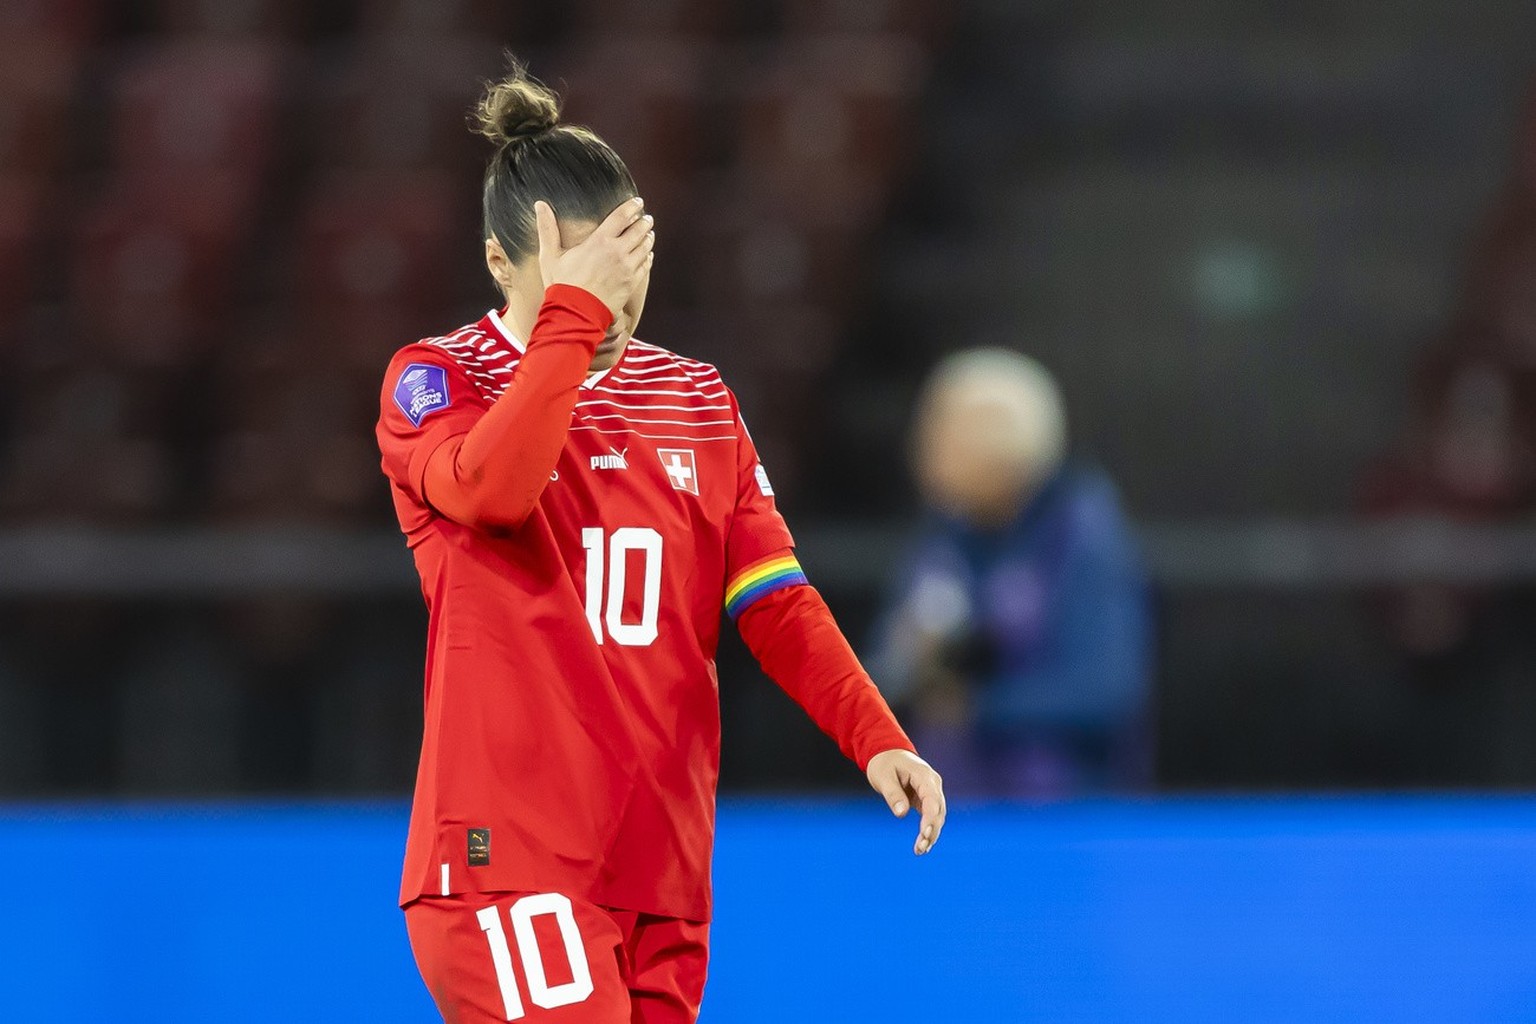 Switzerland&#039;s forward Ramona Bachmann reacts during the UEFA Nations League women&#039;s soccer match between Switzerland and Spain at the Letzigrund stadium in Zurich, Switzerland, on Tuesday Oc ...